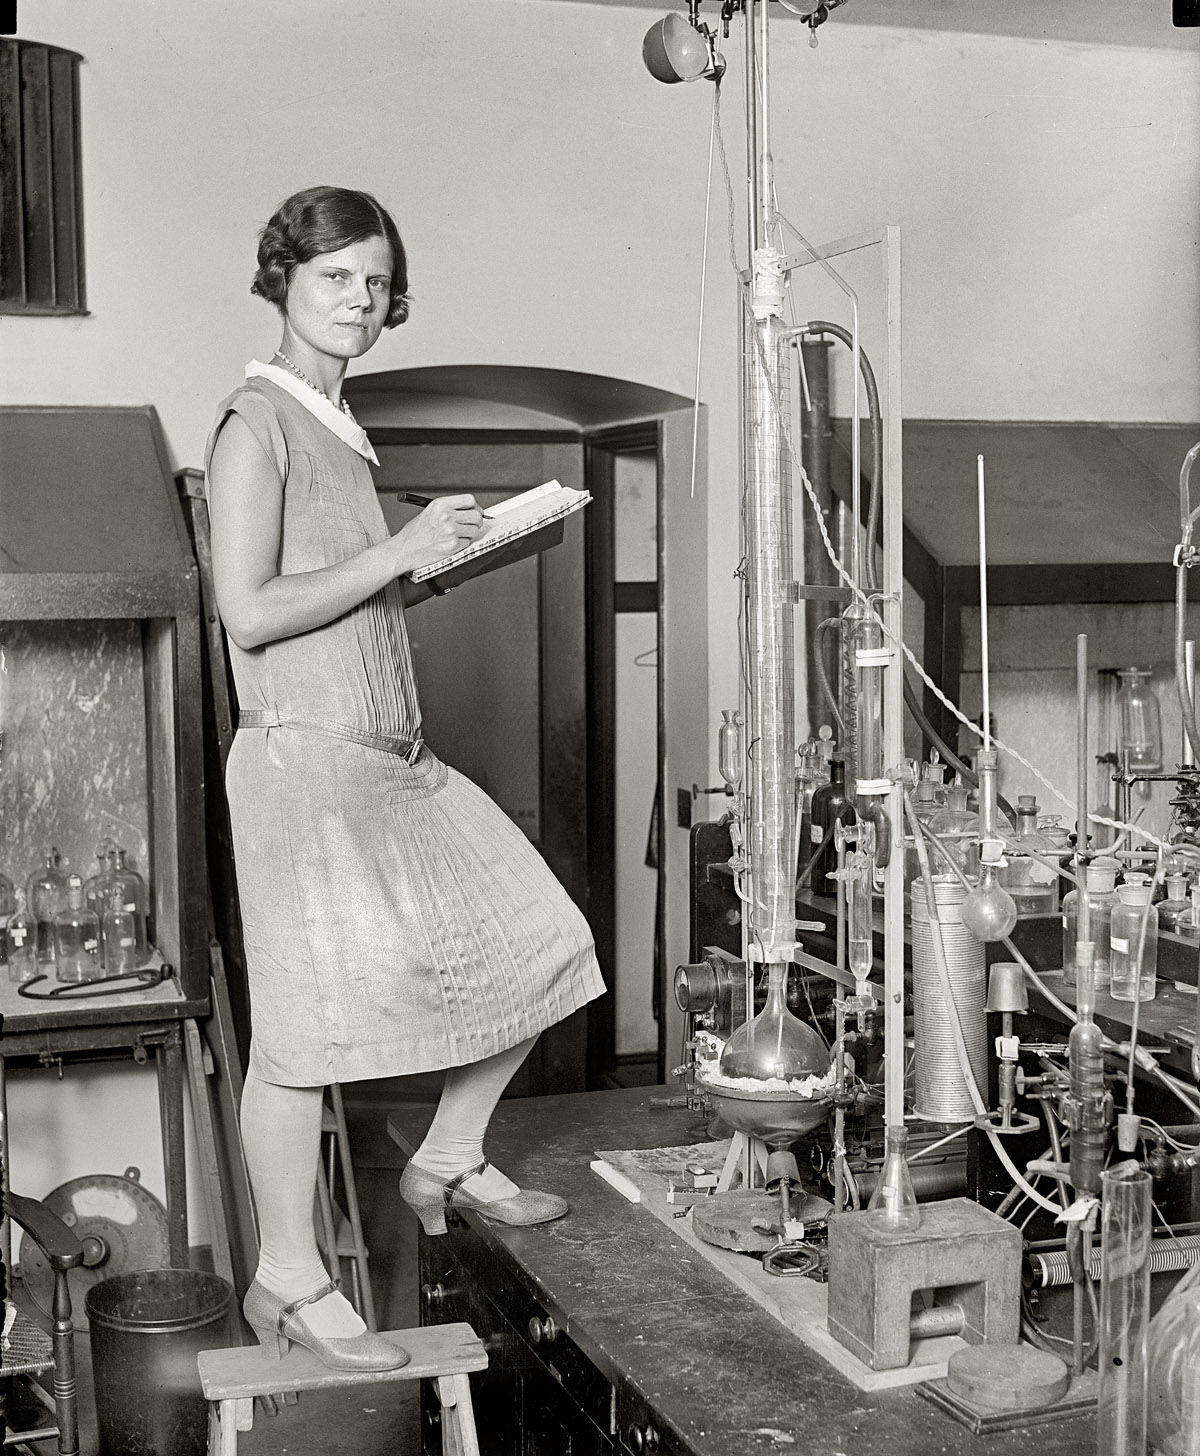 Washington, D.C., circa 1923. "Woman scientist." National Photo Company Collection glass negative, Library of Congress. View full size.